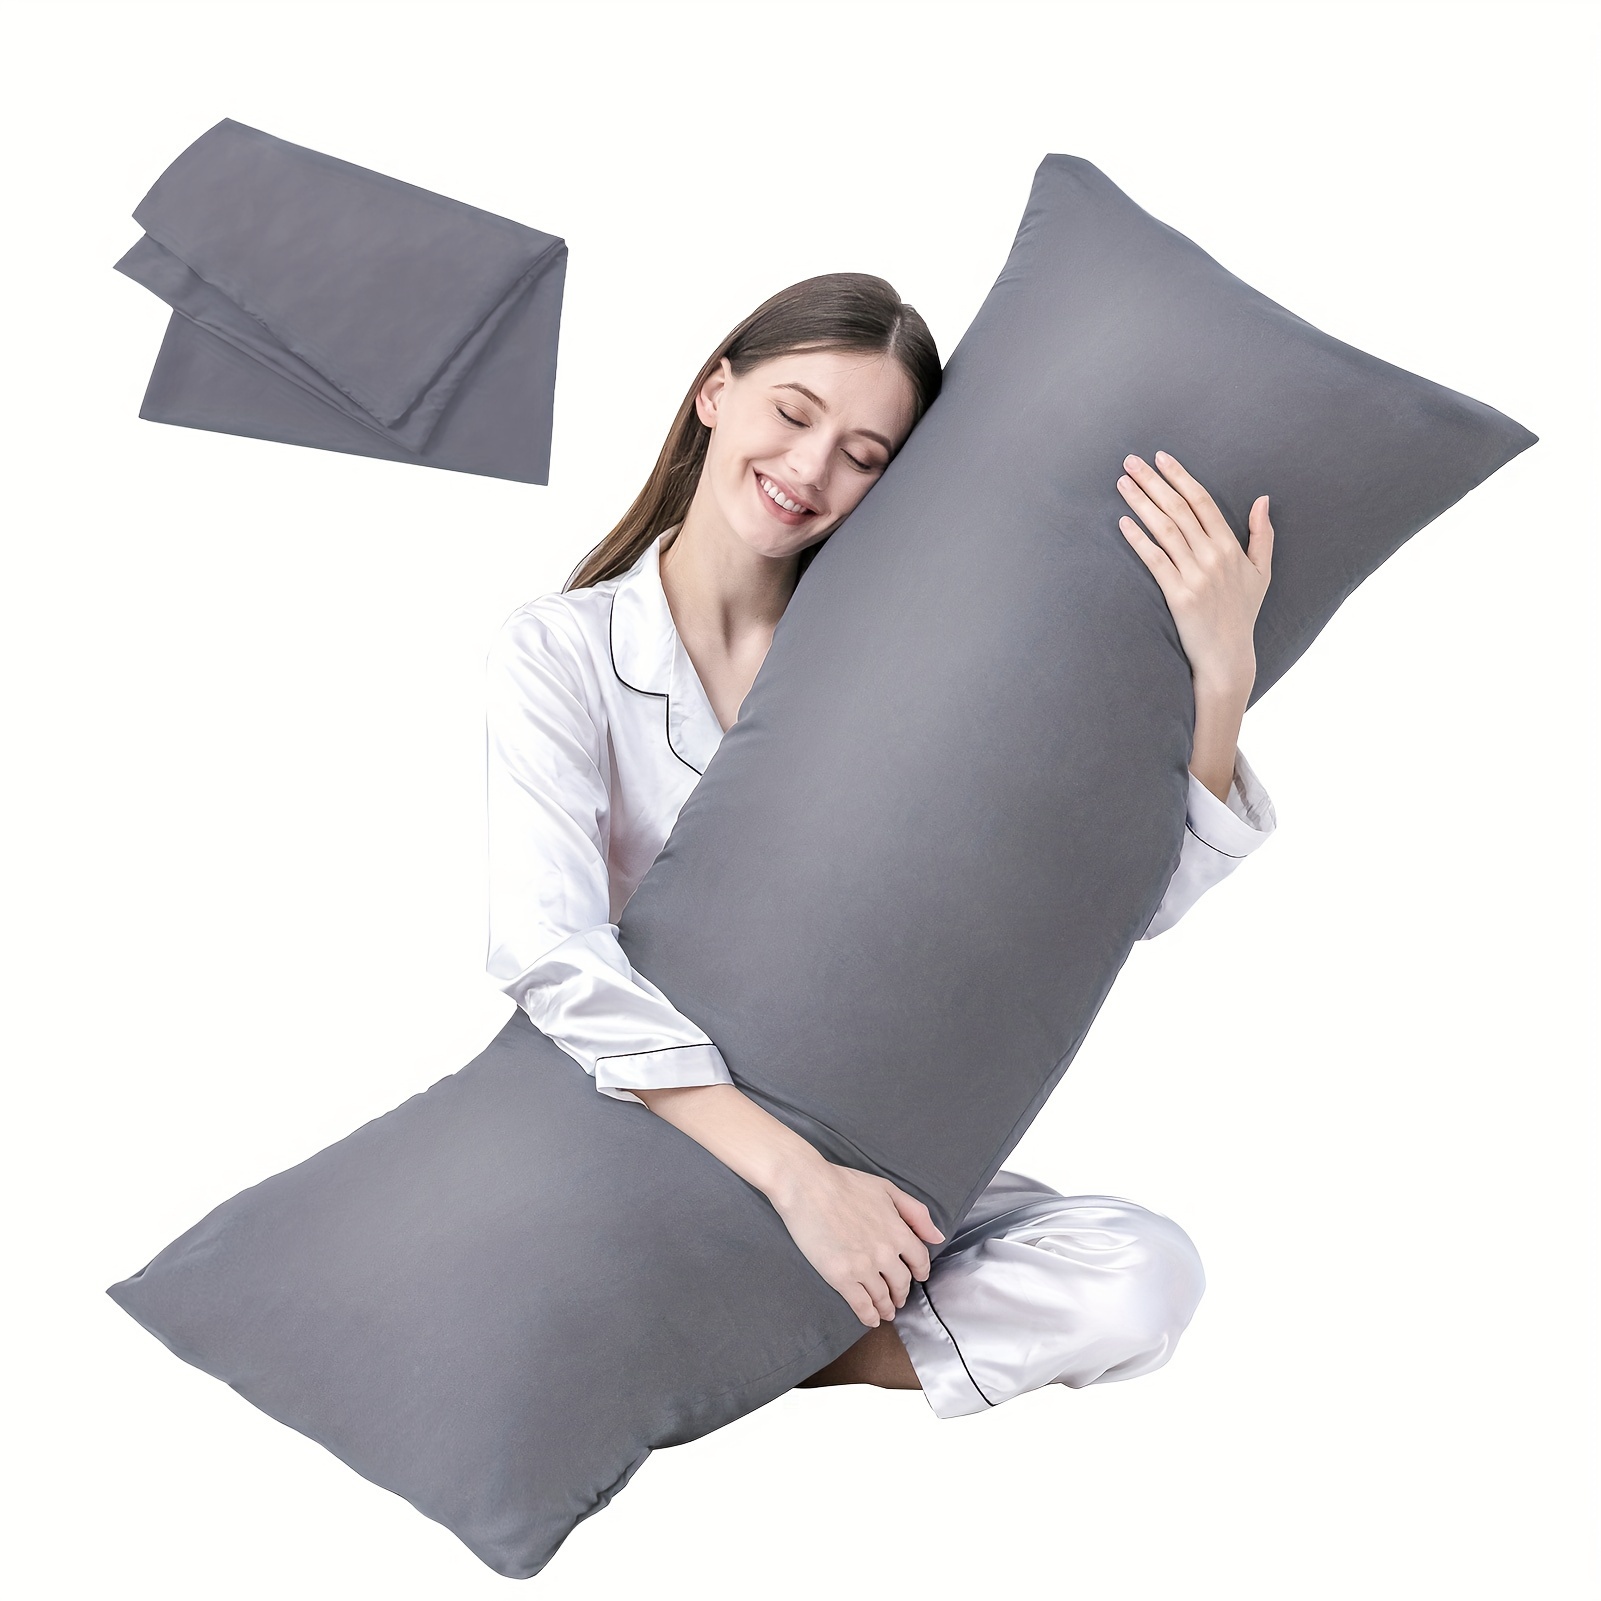 

Downcool Luxury Full Body Pillow Insert With Fiber Cover - Ultra Soft Body Pillow For Sleeping - Breathable Long Bed Pillow Insert, 20"x54"(grey, With Cover)